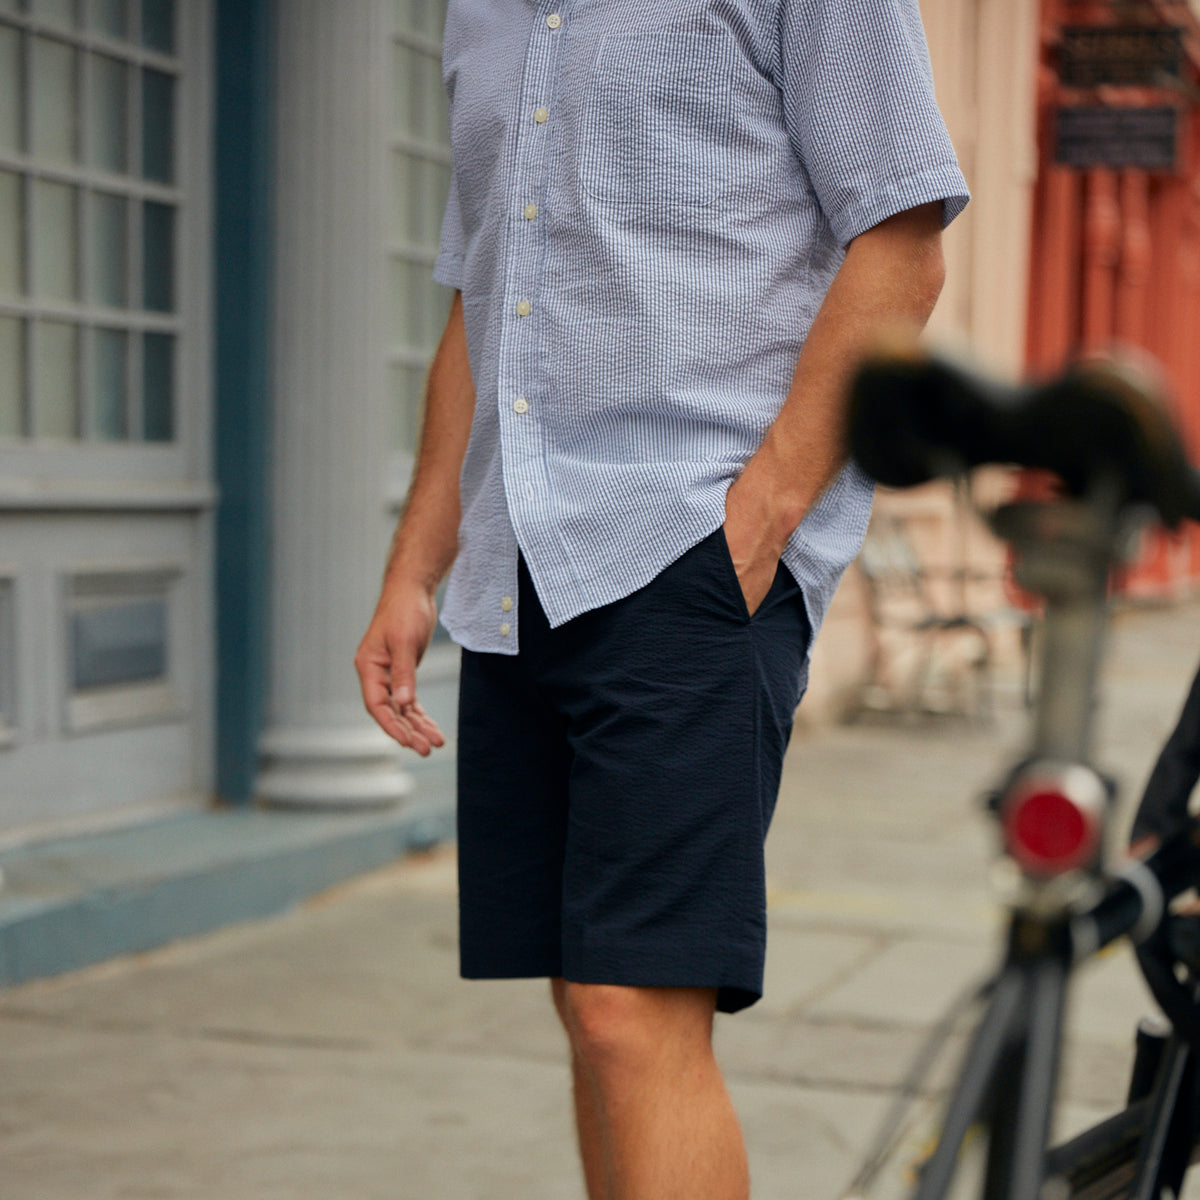 Seersucker all year long in a classic navy &amp; white seersucker shirt. Subtle, lightweight, and a texture they begs a second look.  100% Cotton Seersucker • Button Down Collar • Short Sleeve • Chest Pocket • Machine Washable • Imported